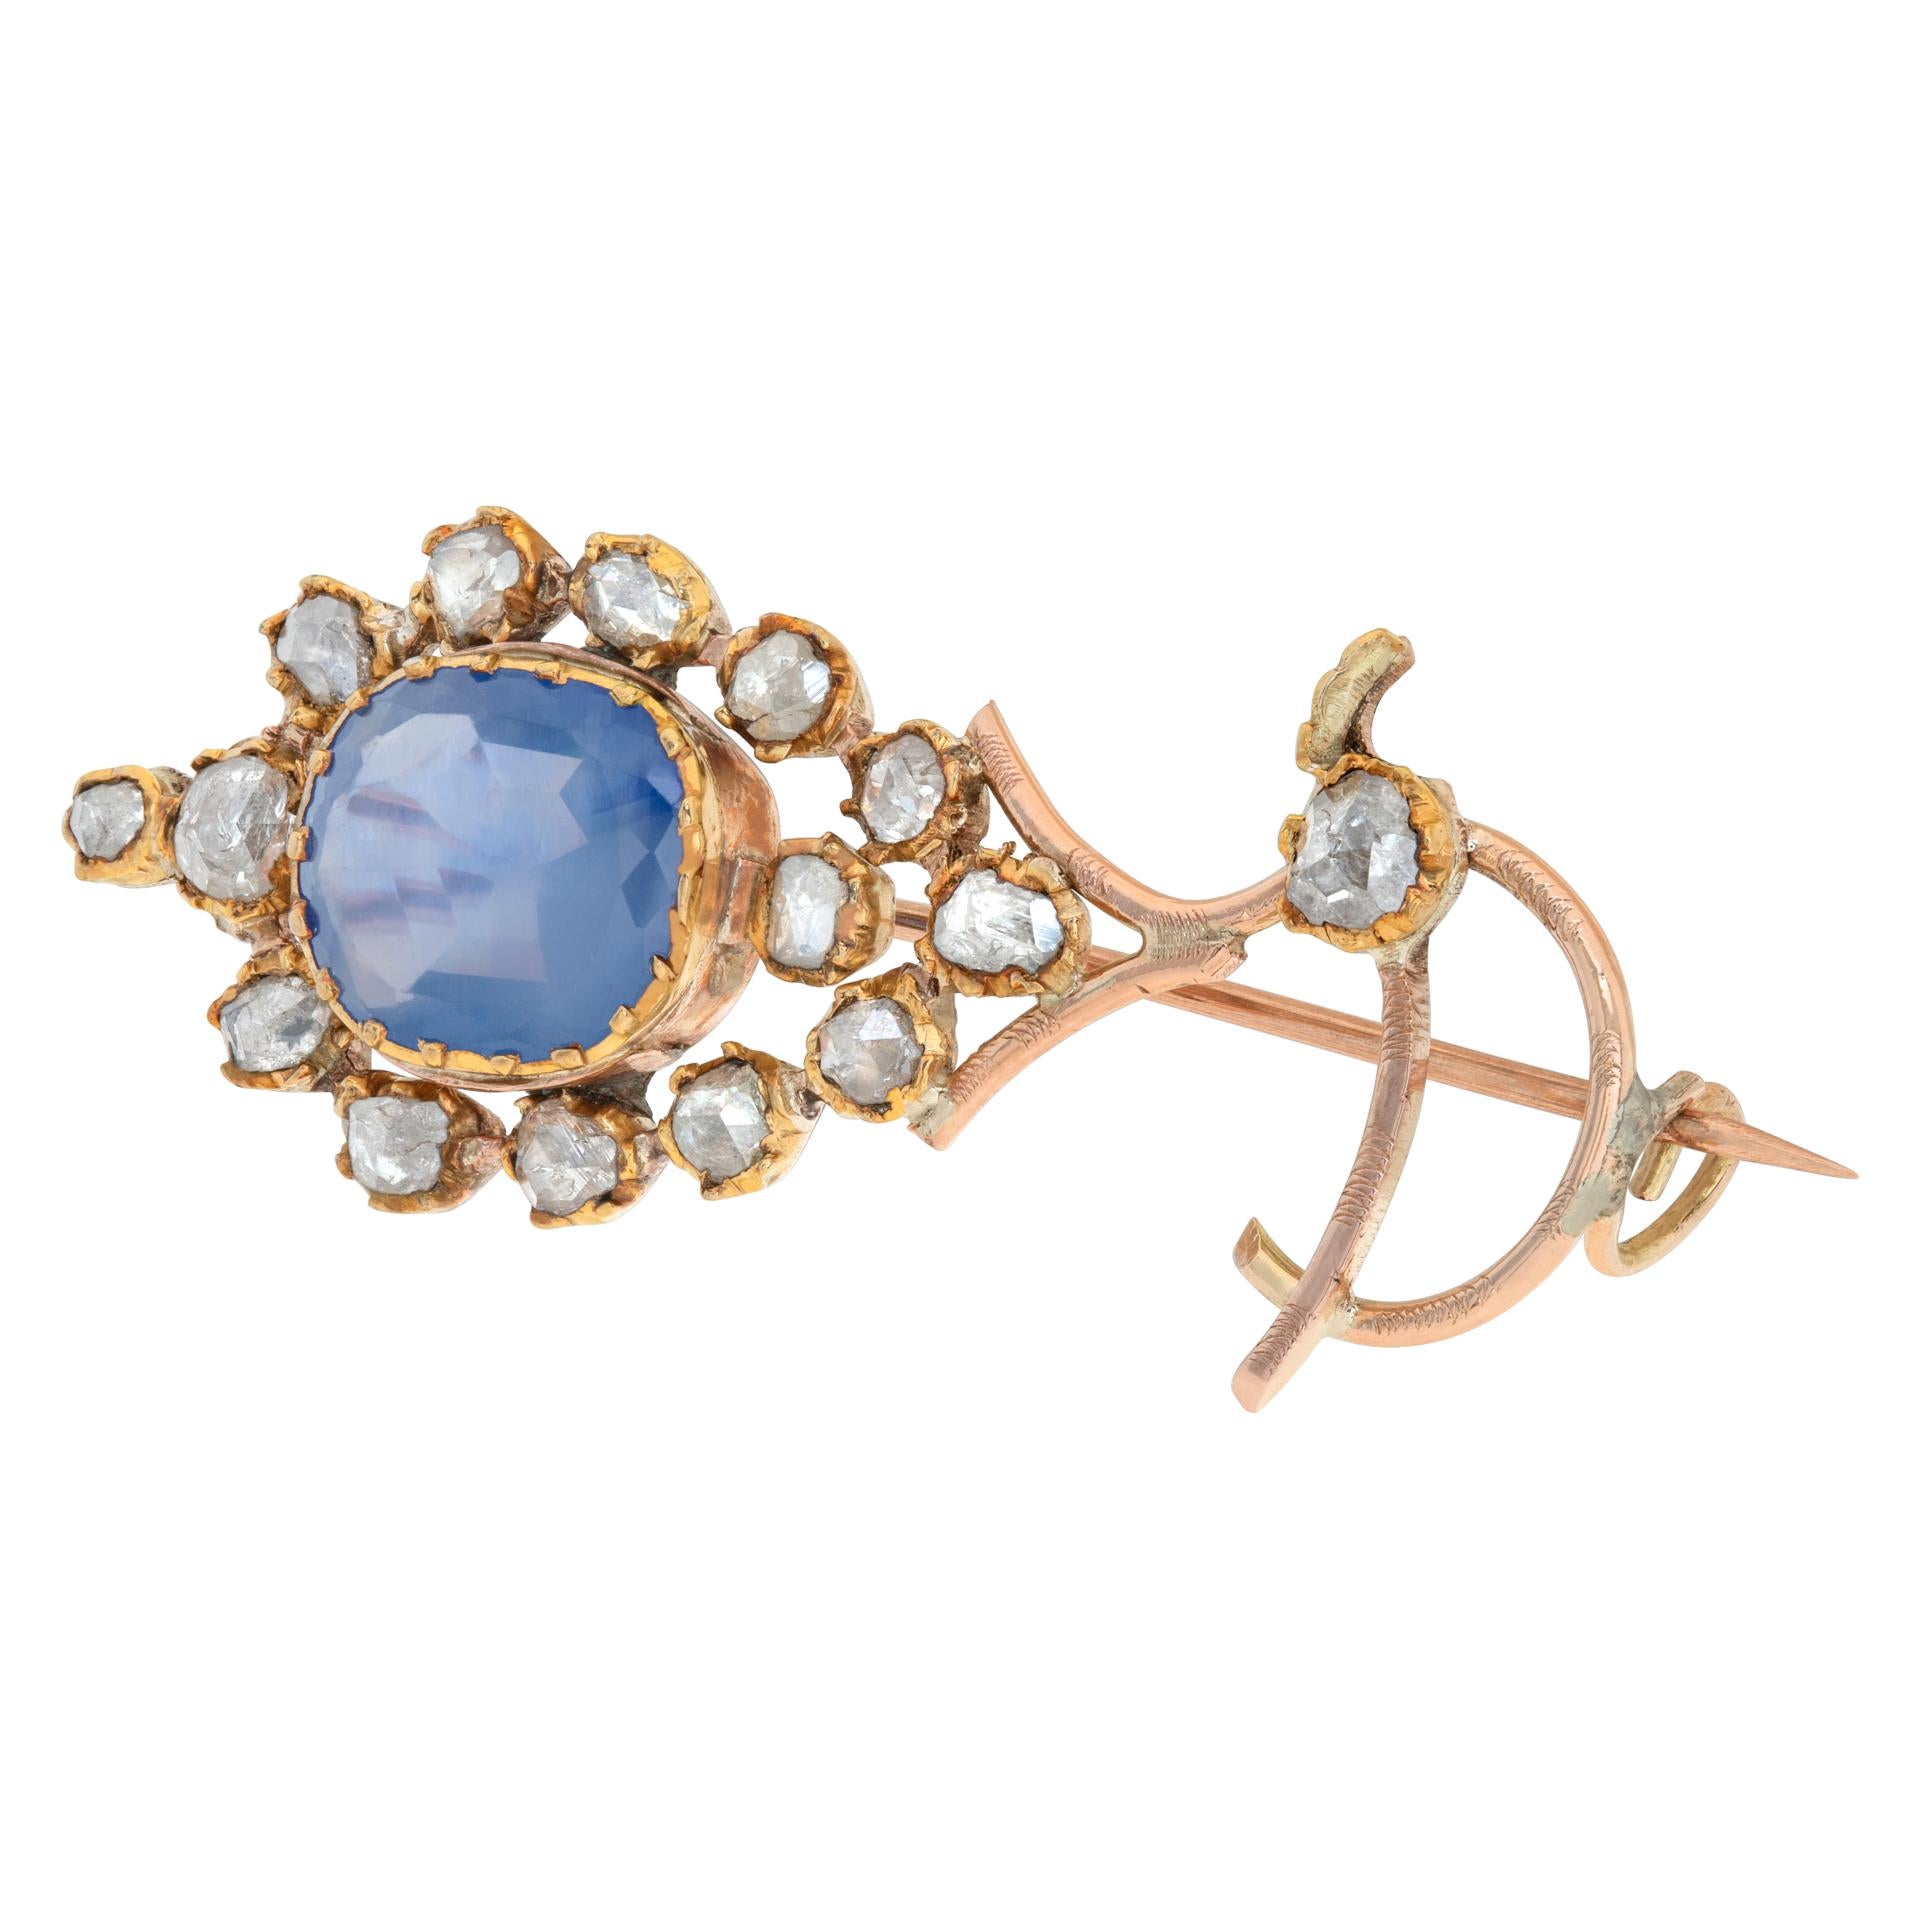 AGL Ceritified Antique European brooch, circa 1800's. with old mine cut diamonds and cushion, mixed cut natural unheated Ceylon corundum sapphire center, estimated over 10 carats, set in 18k rose gold.